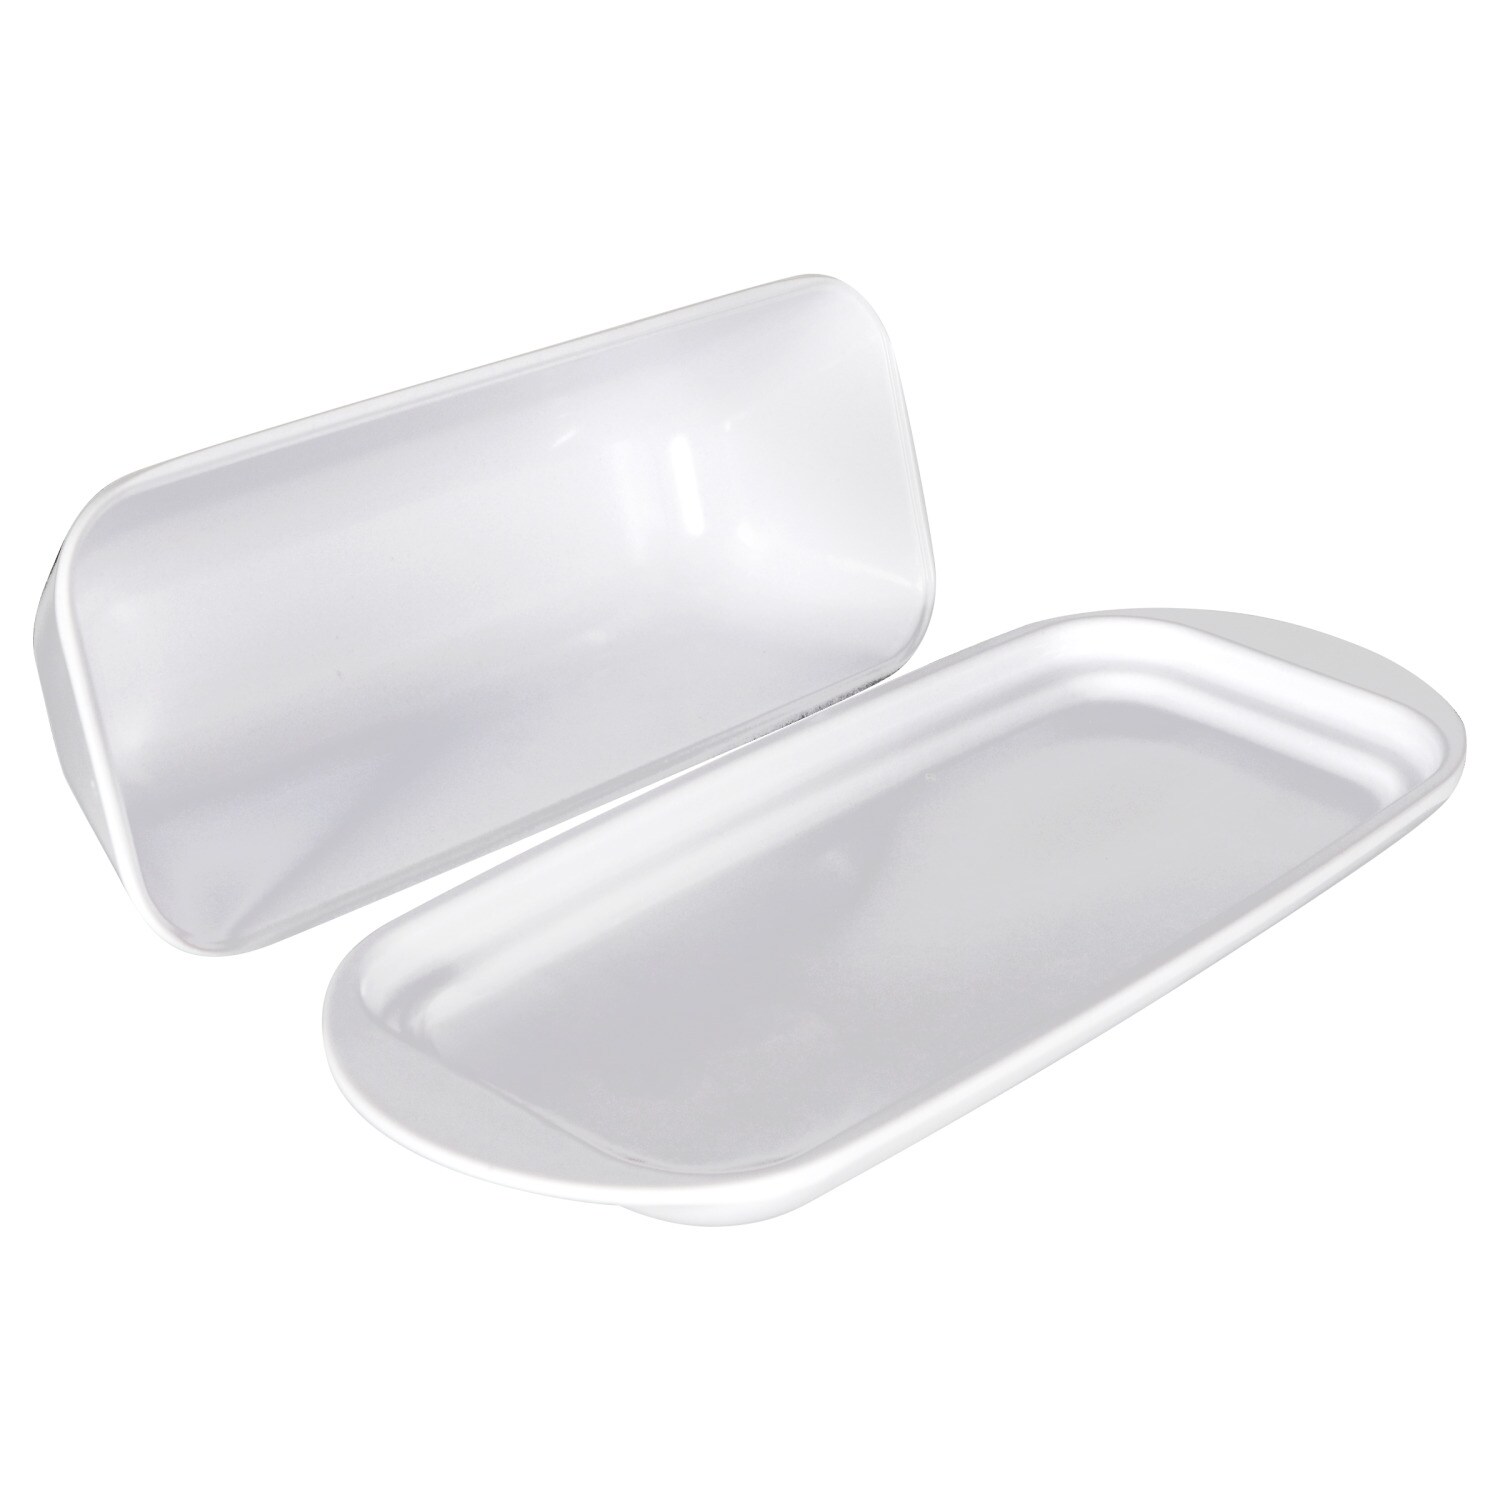 Melamine Butter Dishes Details about   Cooking Concepts Butter Dish Single Stick White Texture 